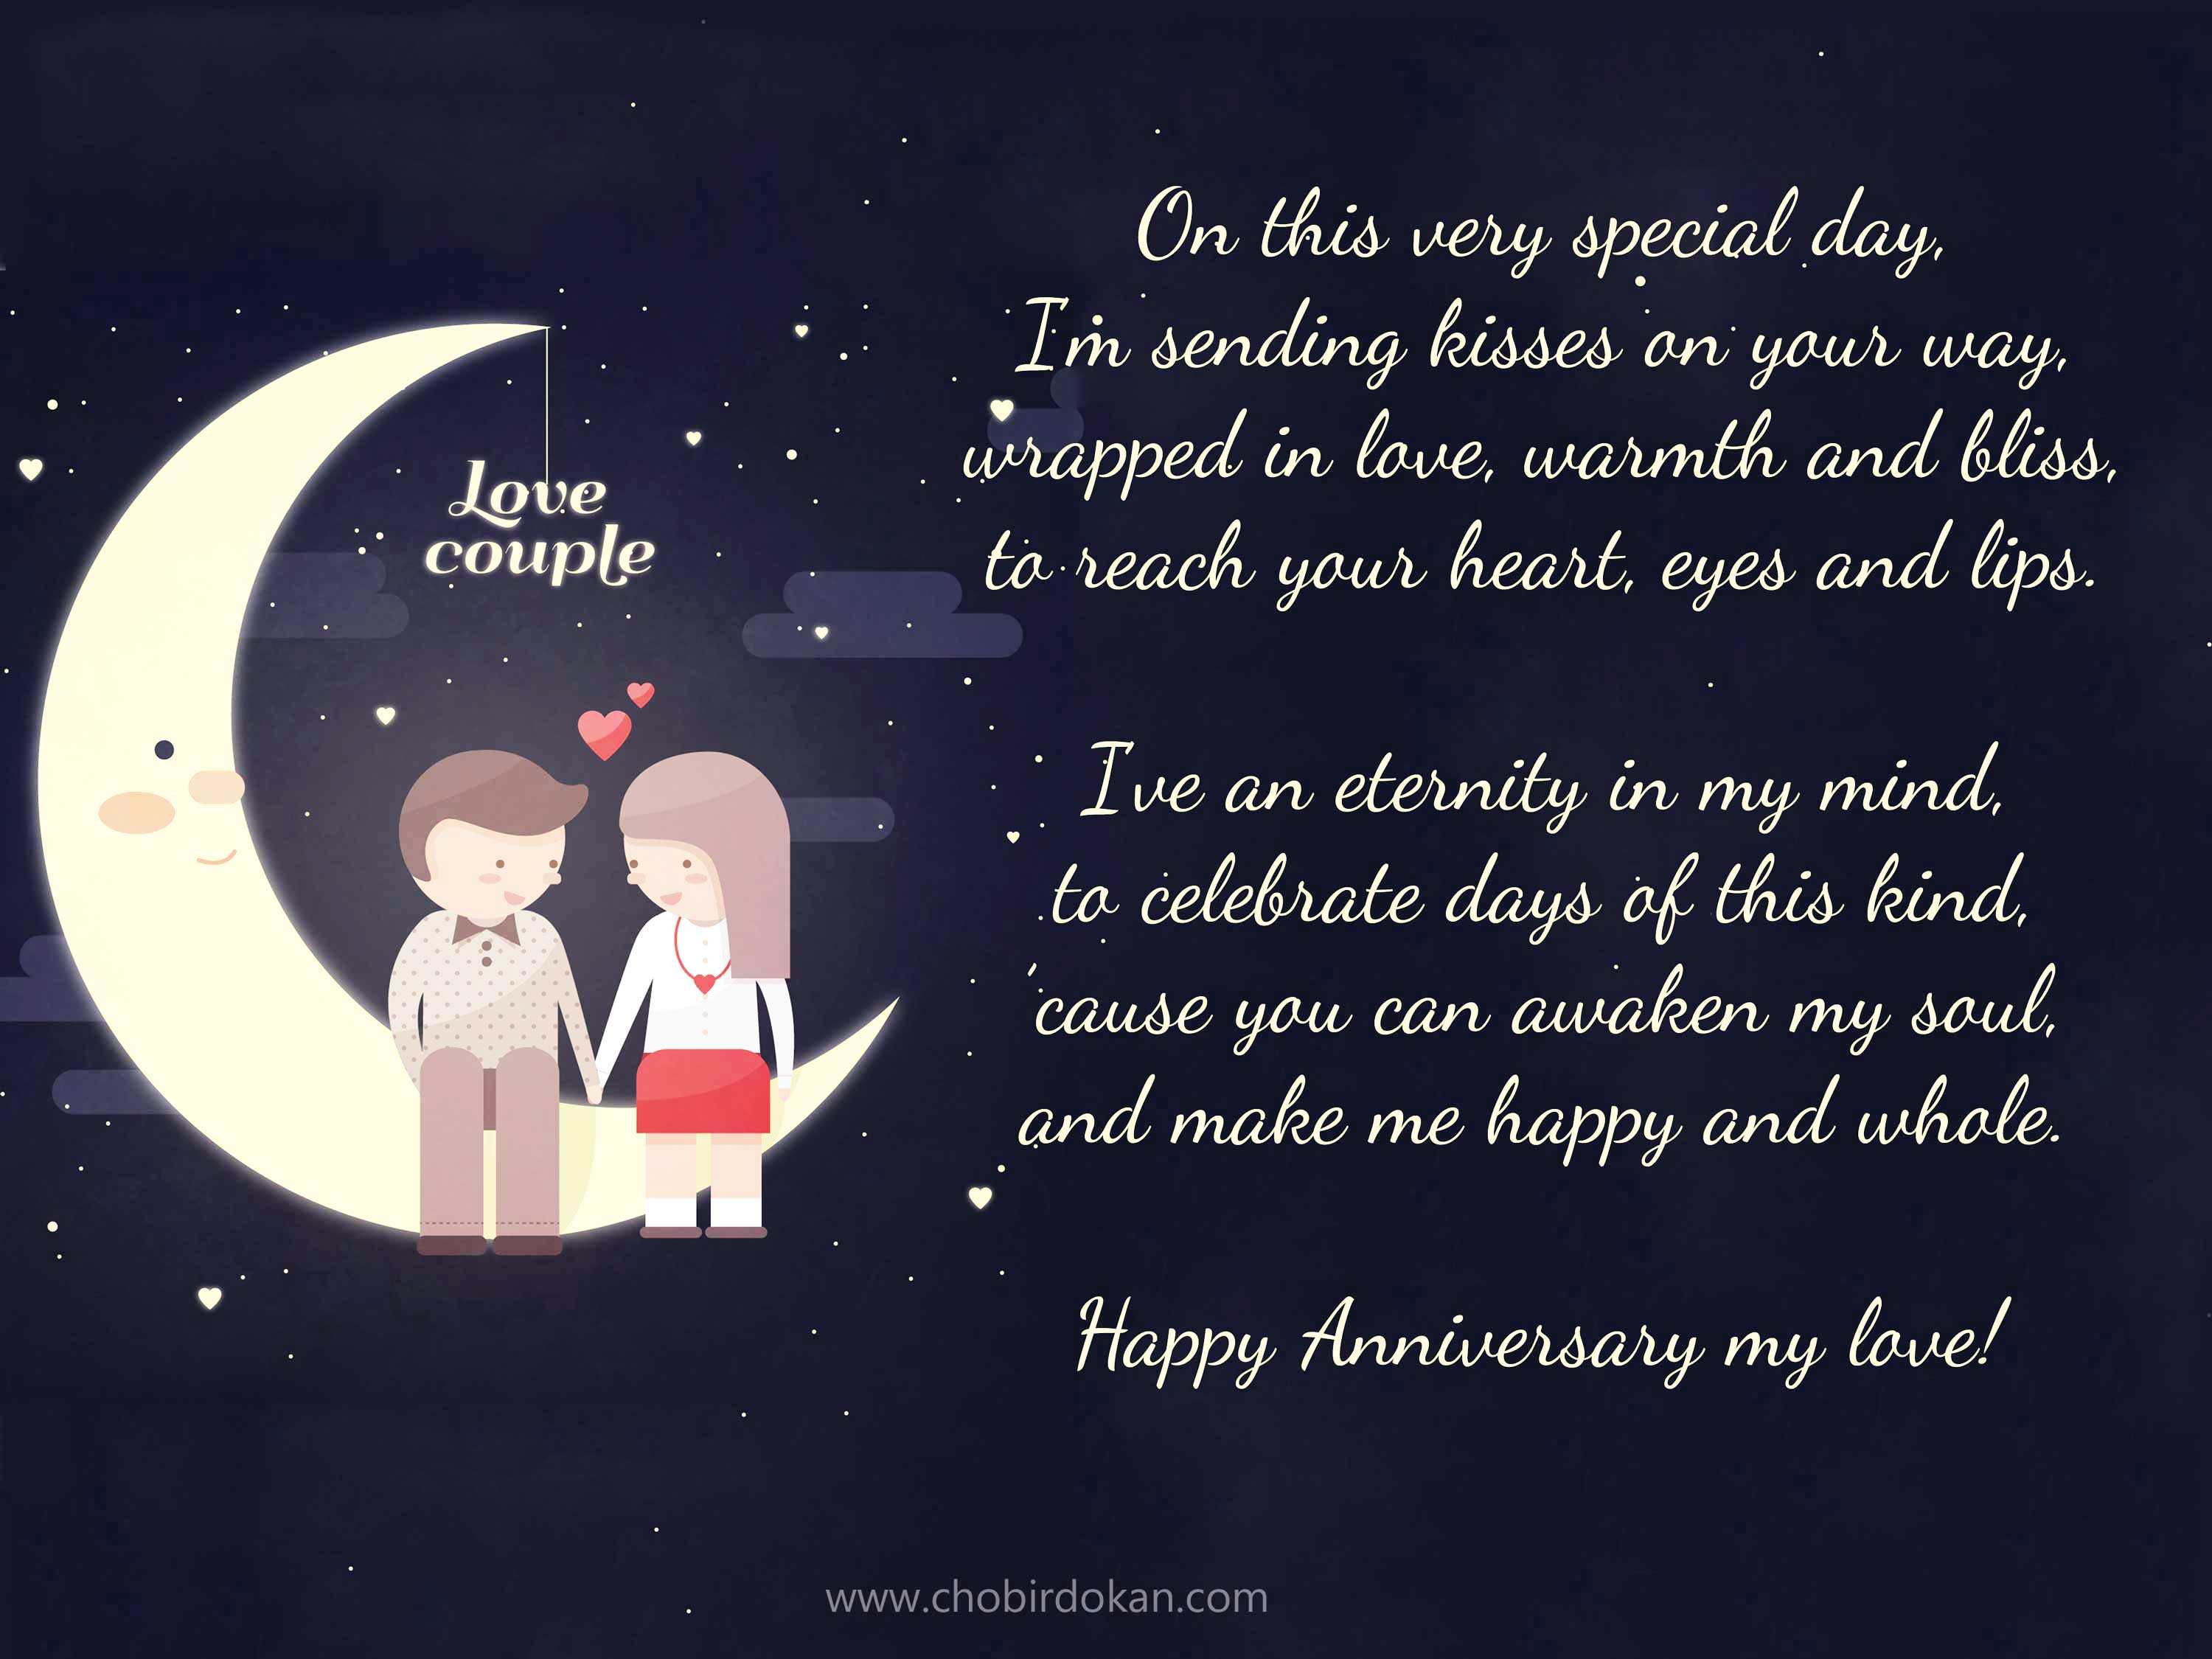 Romantic Anniversary Poems For Her -For Wife or Girlfriend|Poems